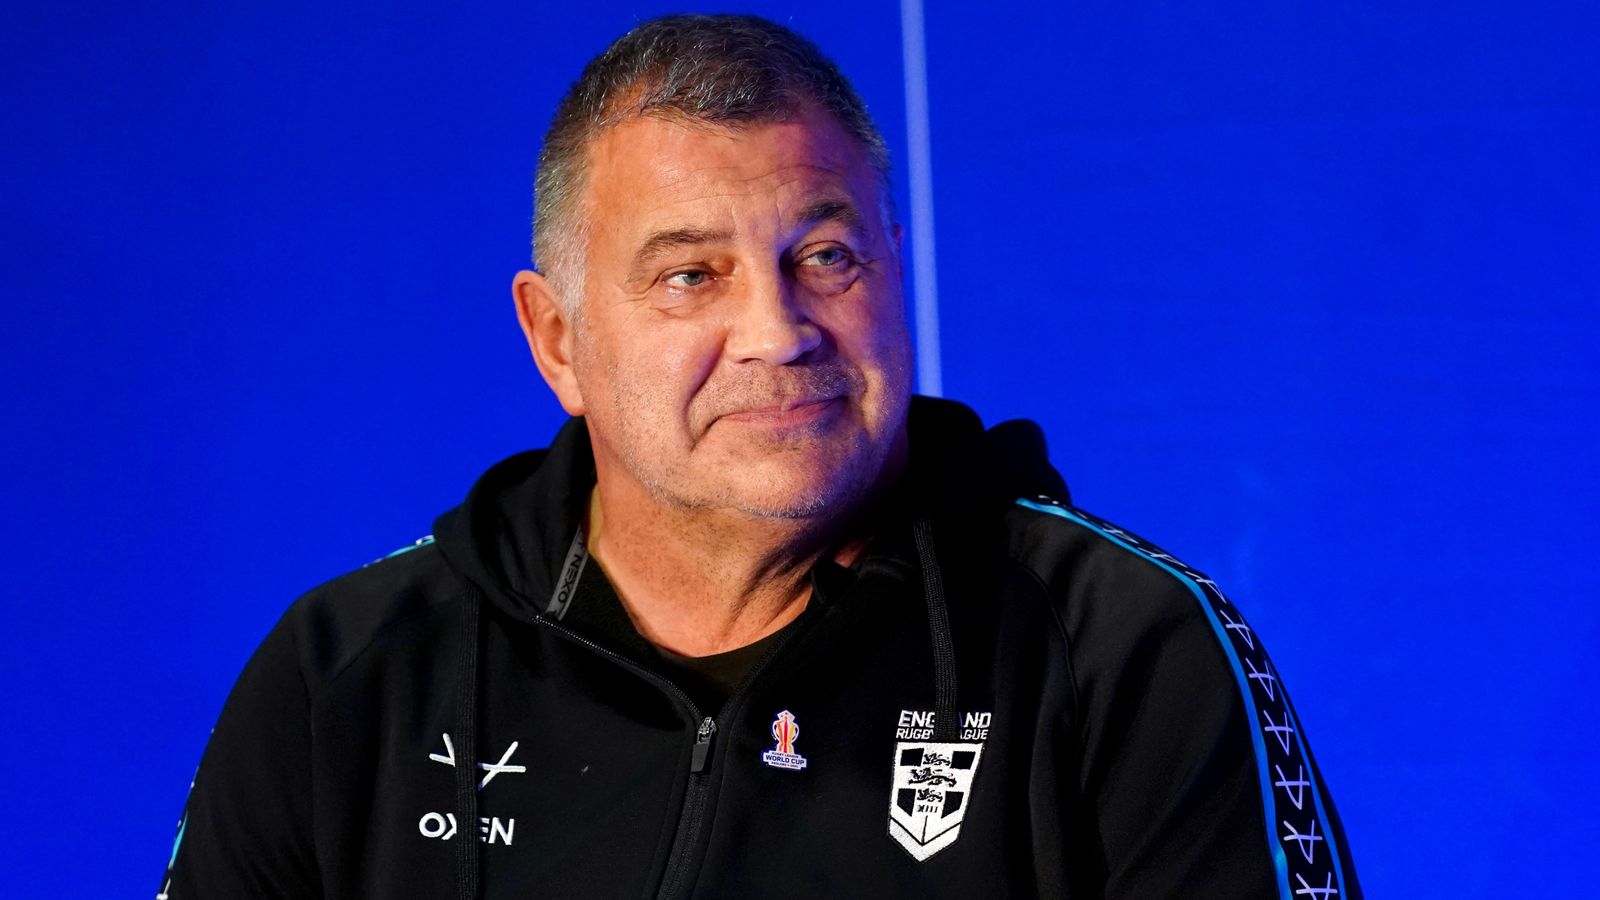 rugby-league-world-cup-2021-england-vs-samoa-talking-points-and-team-news-ahead-of-opening-match-in-newcastle